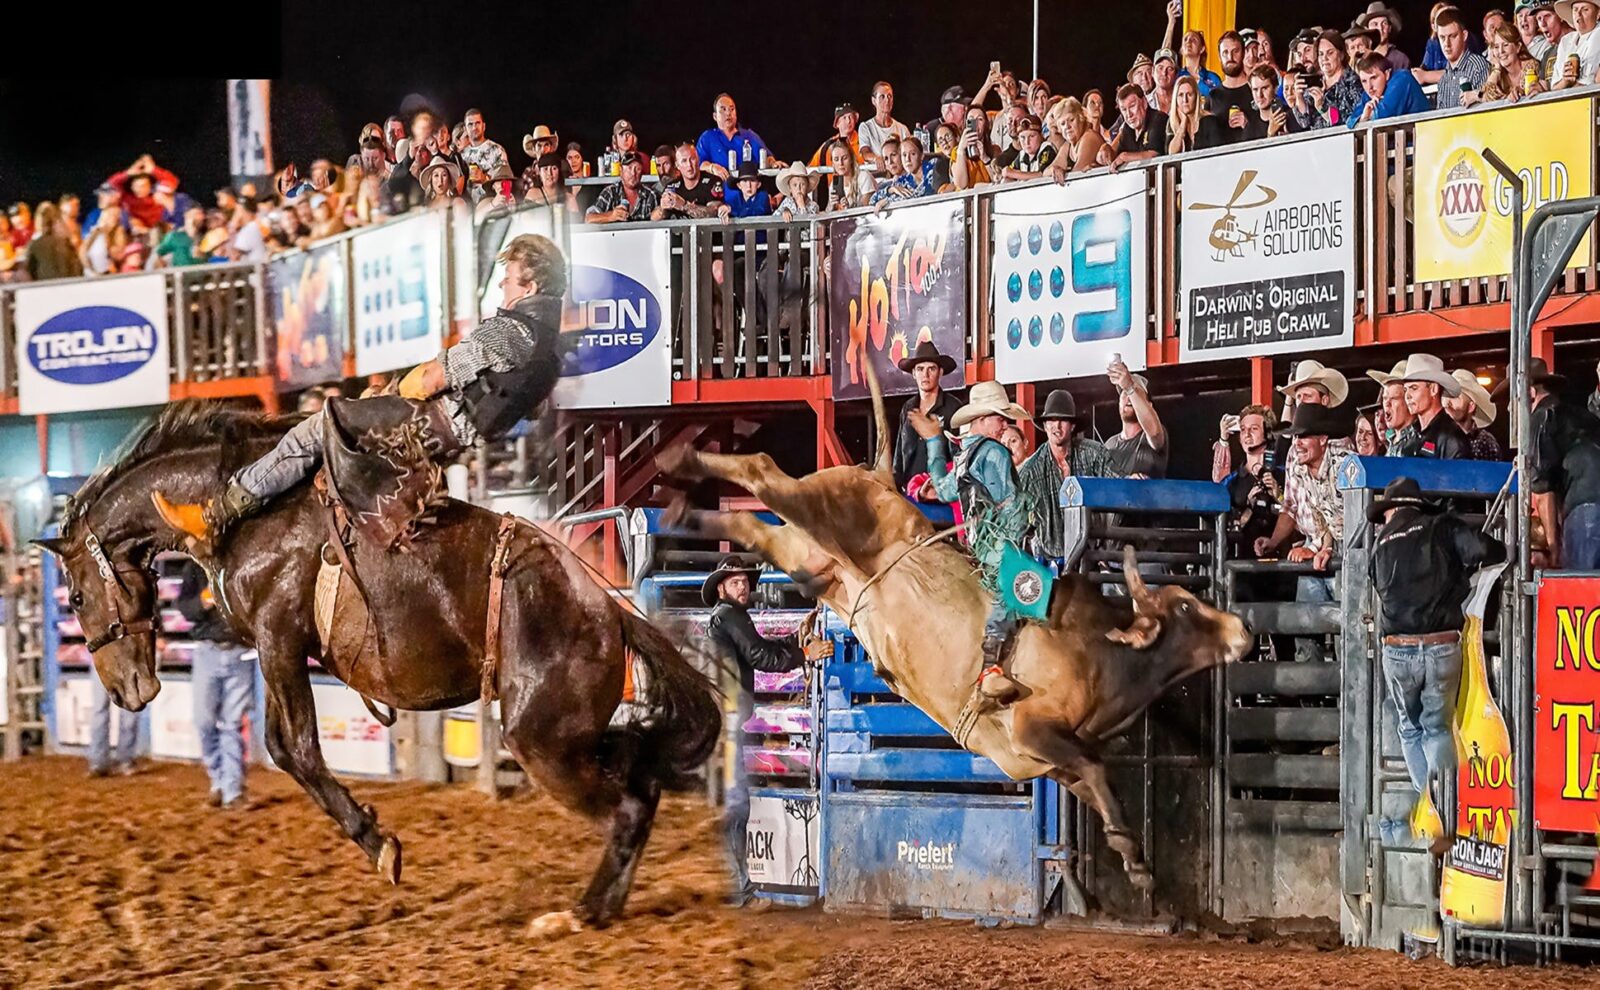 A Cowboy riding a bucking horse and a cowboy riding a bucking bull both in front of the grand stand